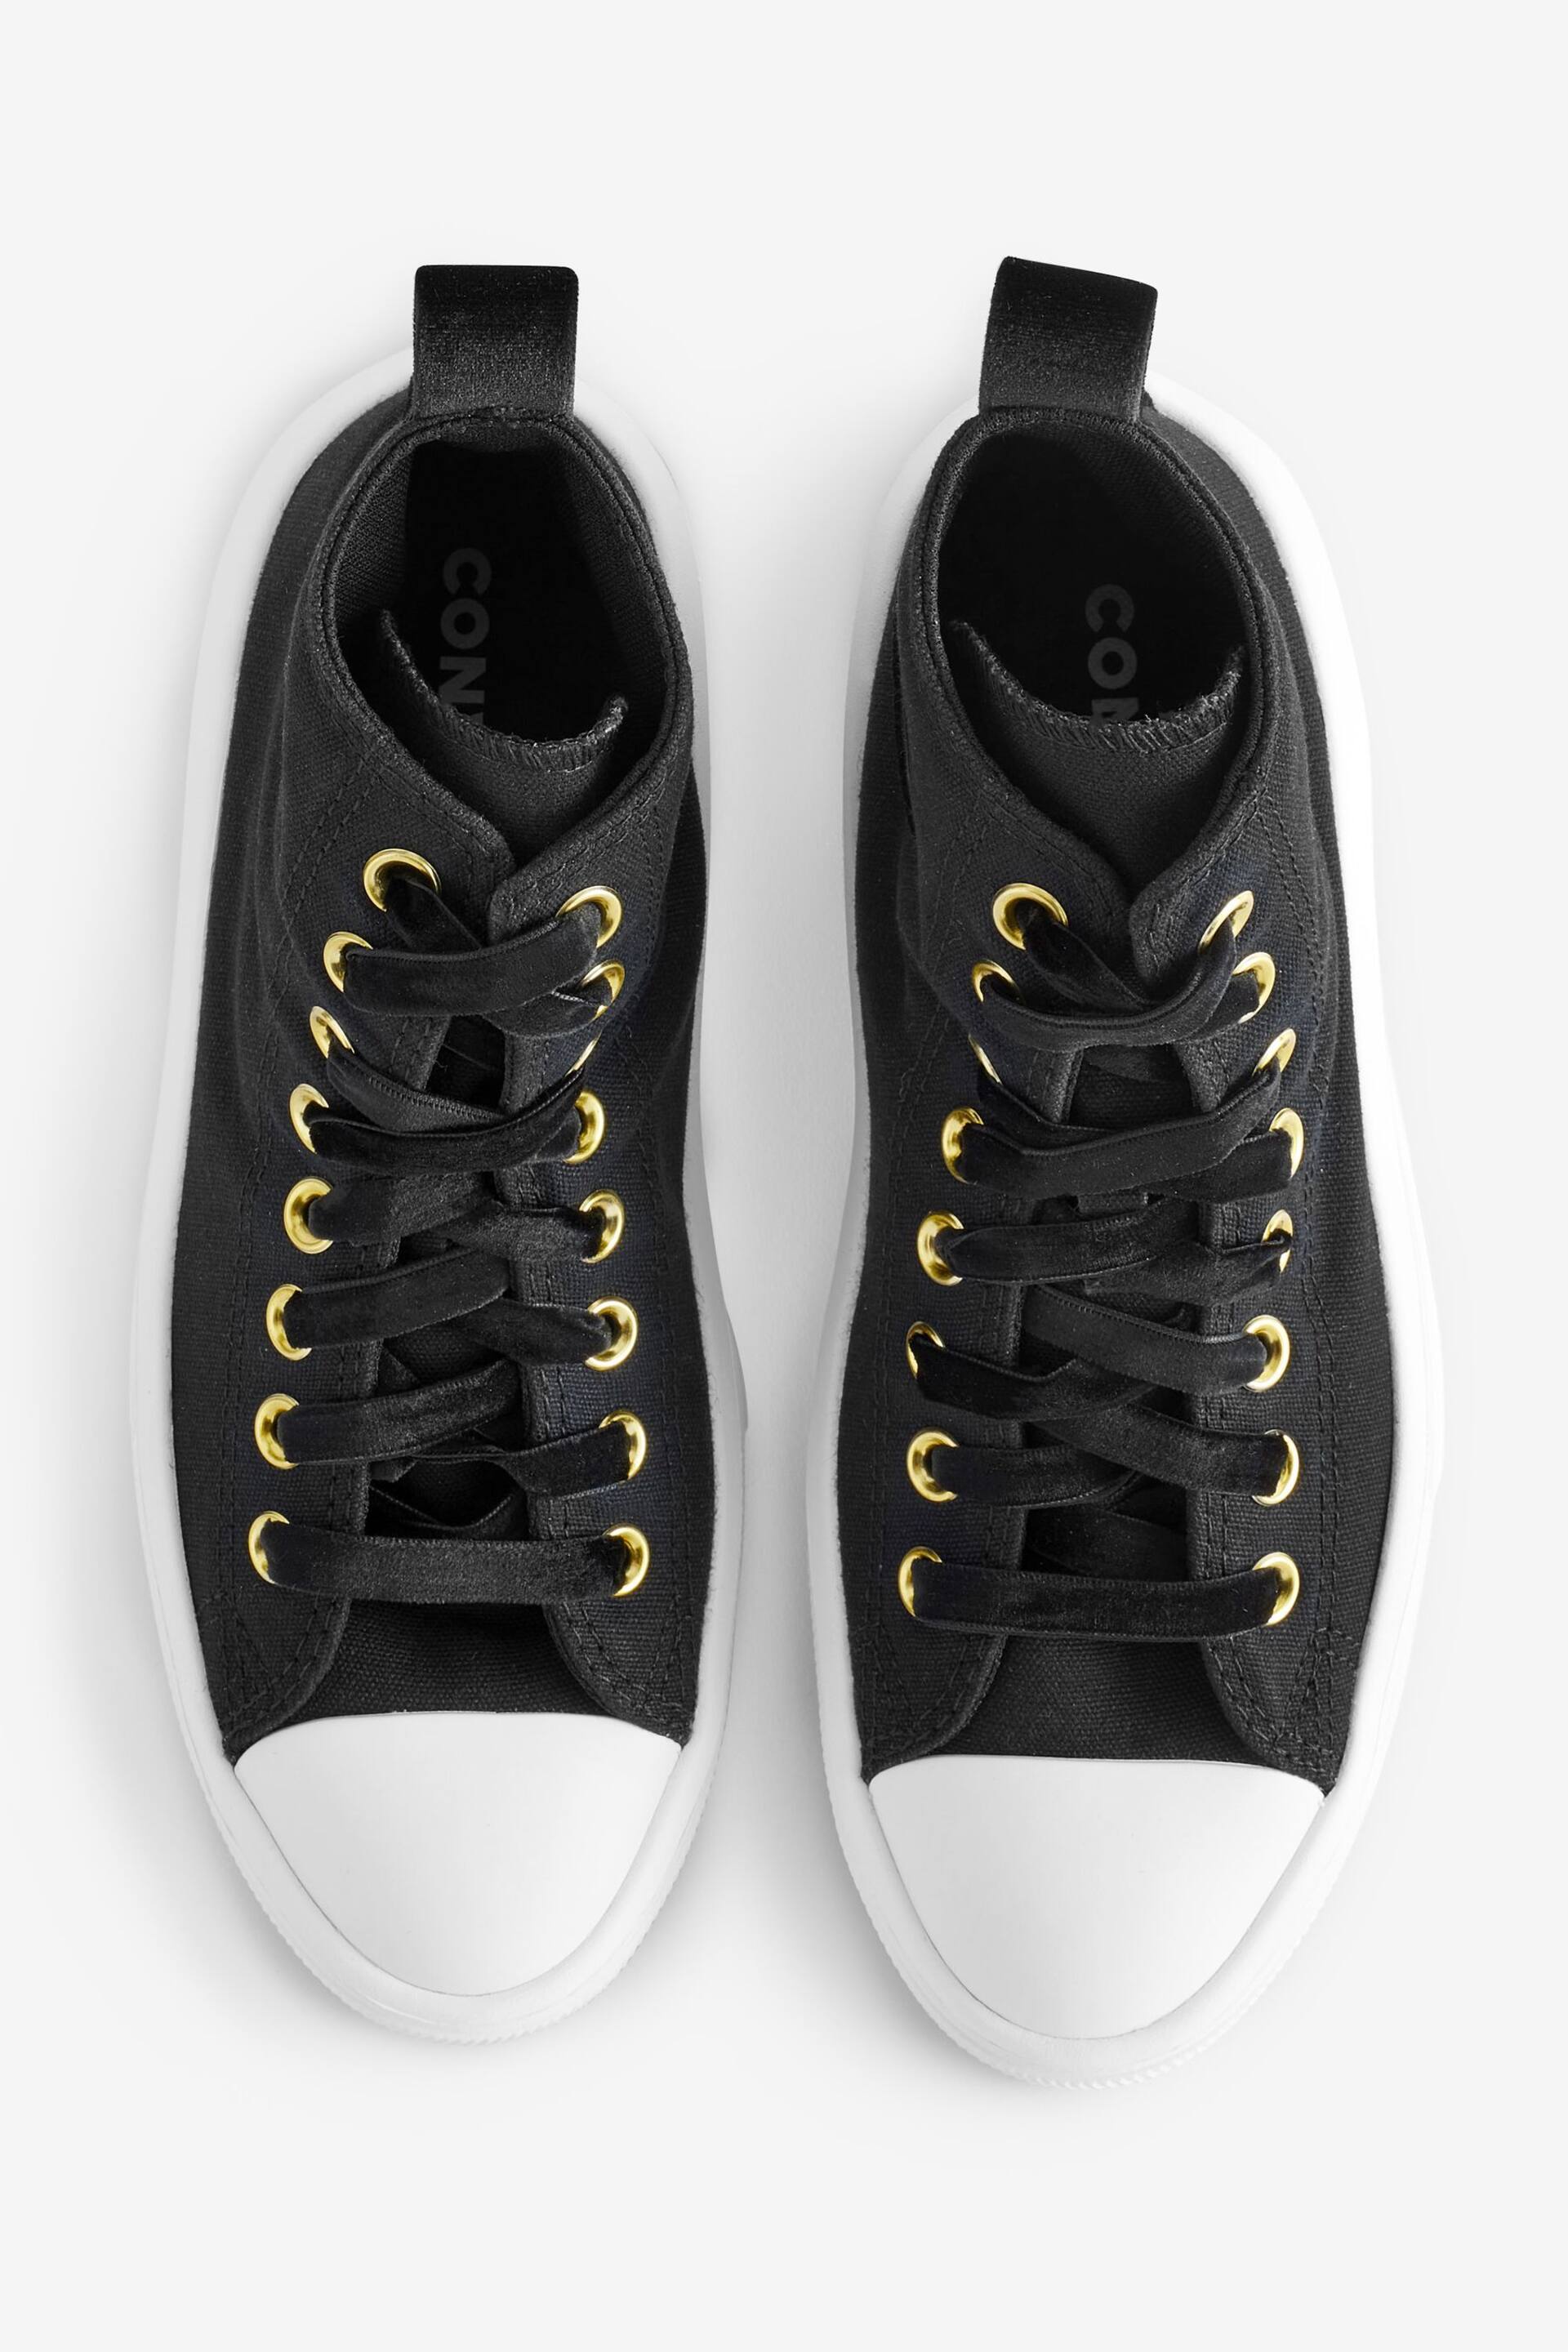 Converse Black Velvet Move Youth Trainers - Image 10 of 14